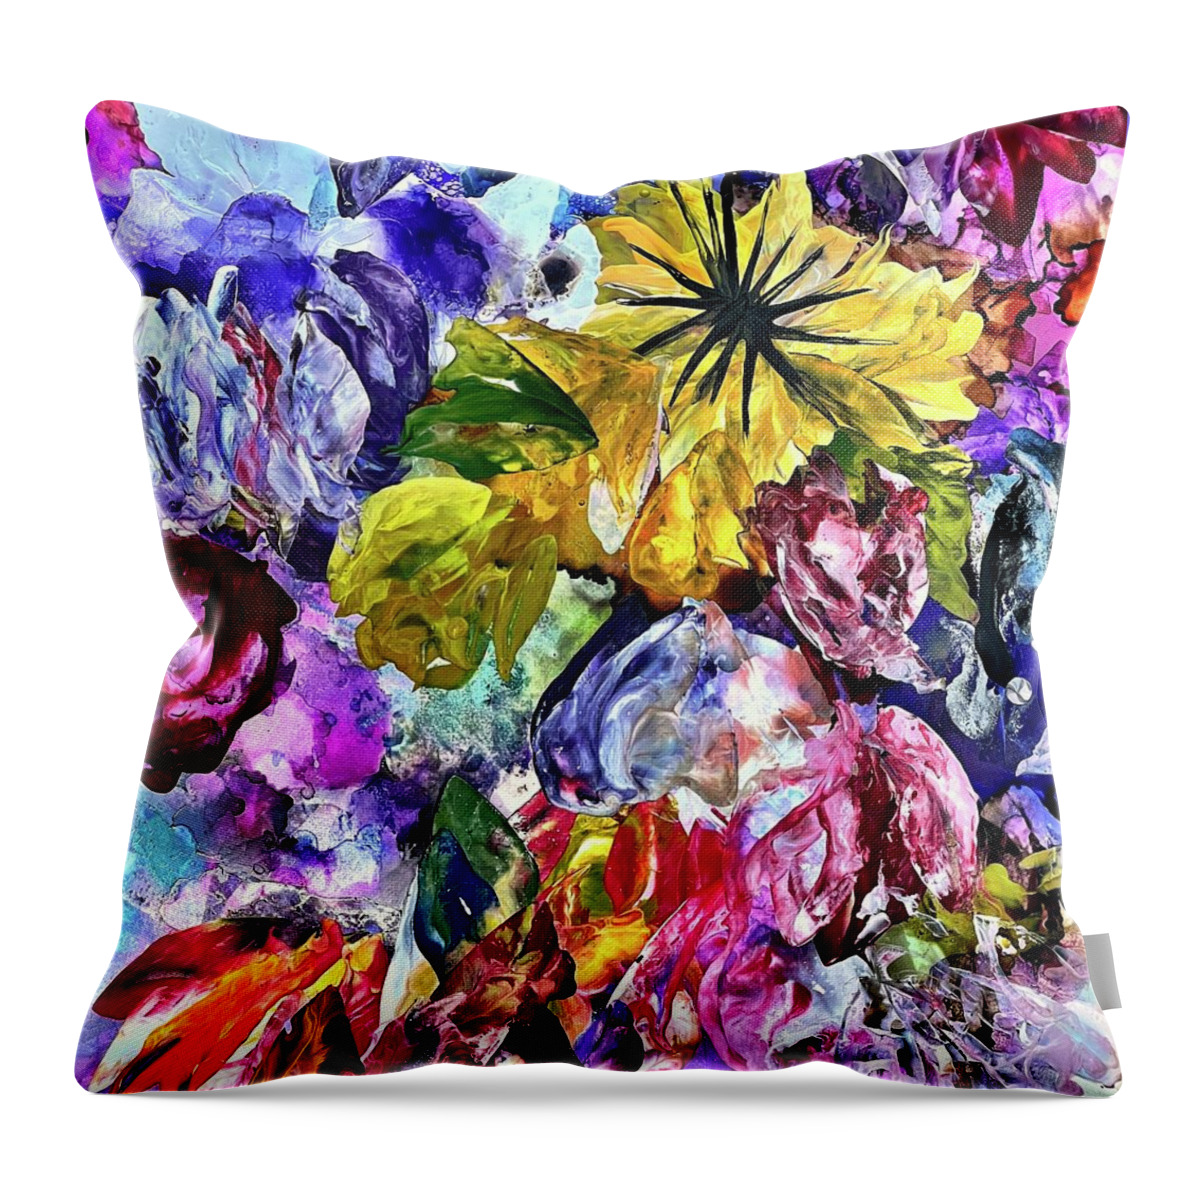  Throw Pillow featuring the painting Just For You by Tommy McDonell